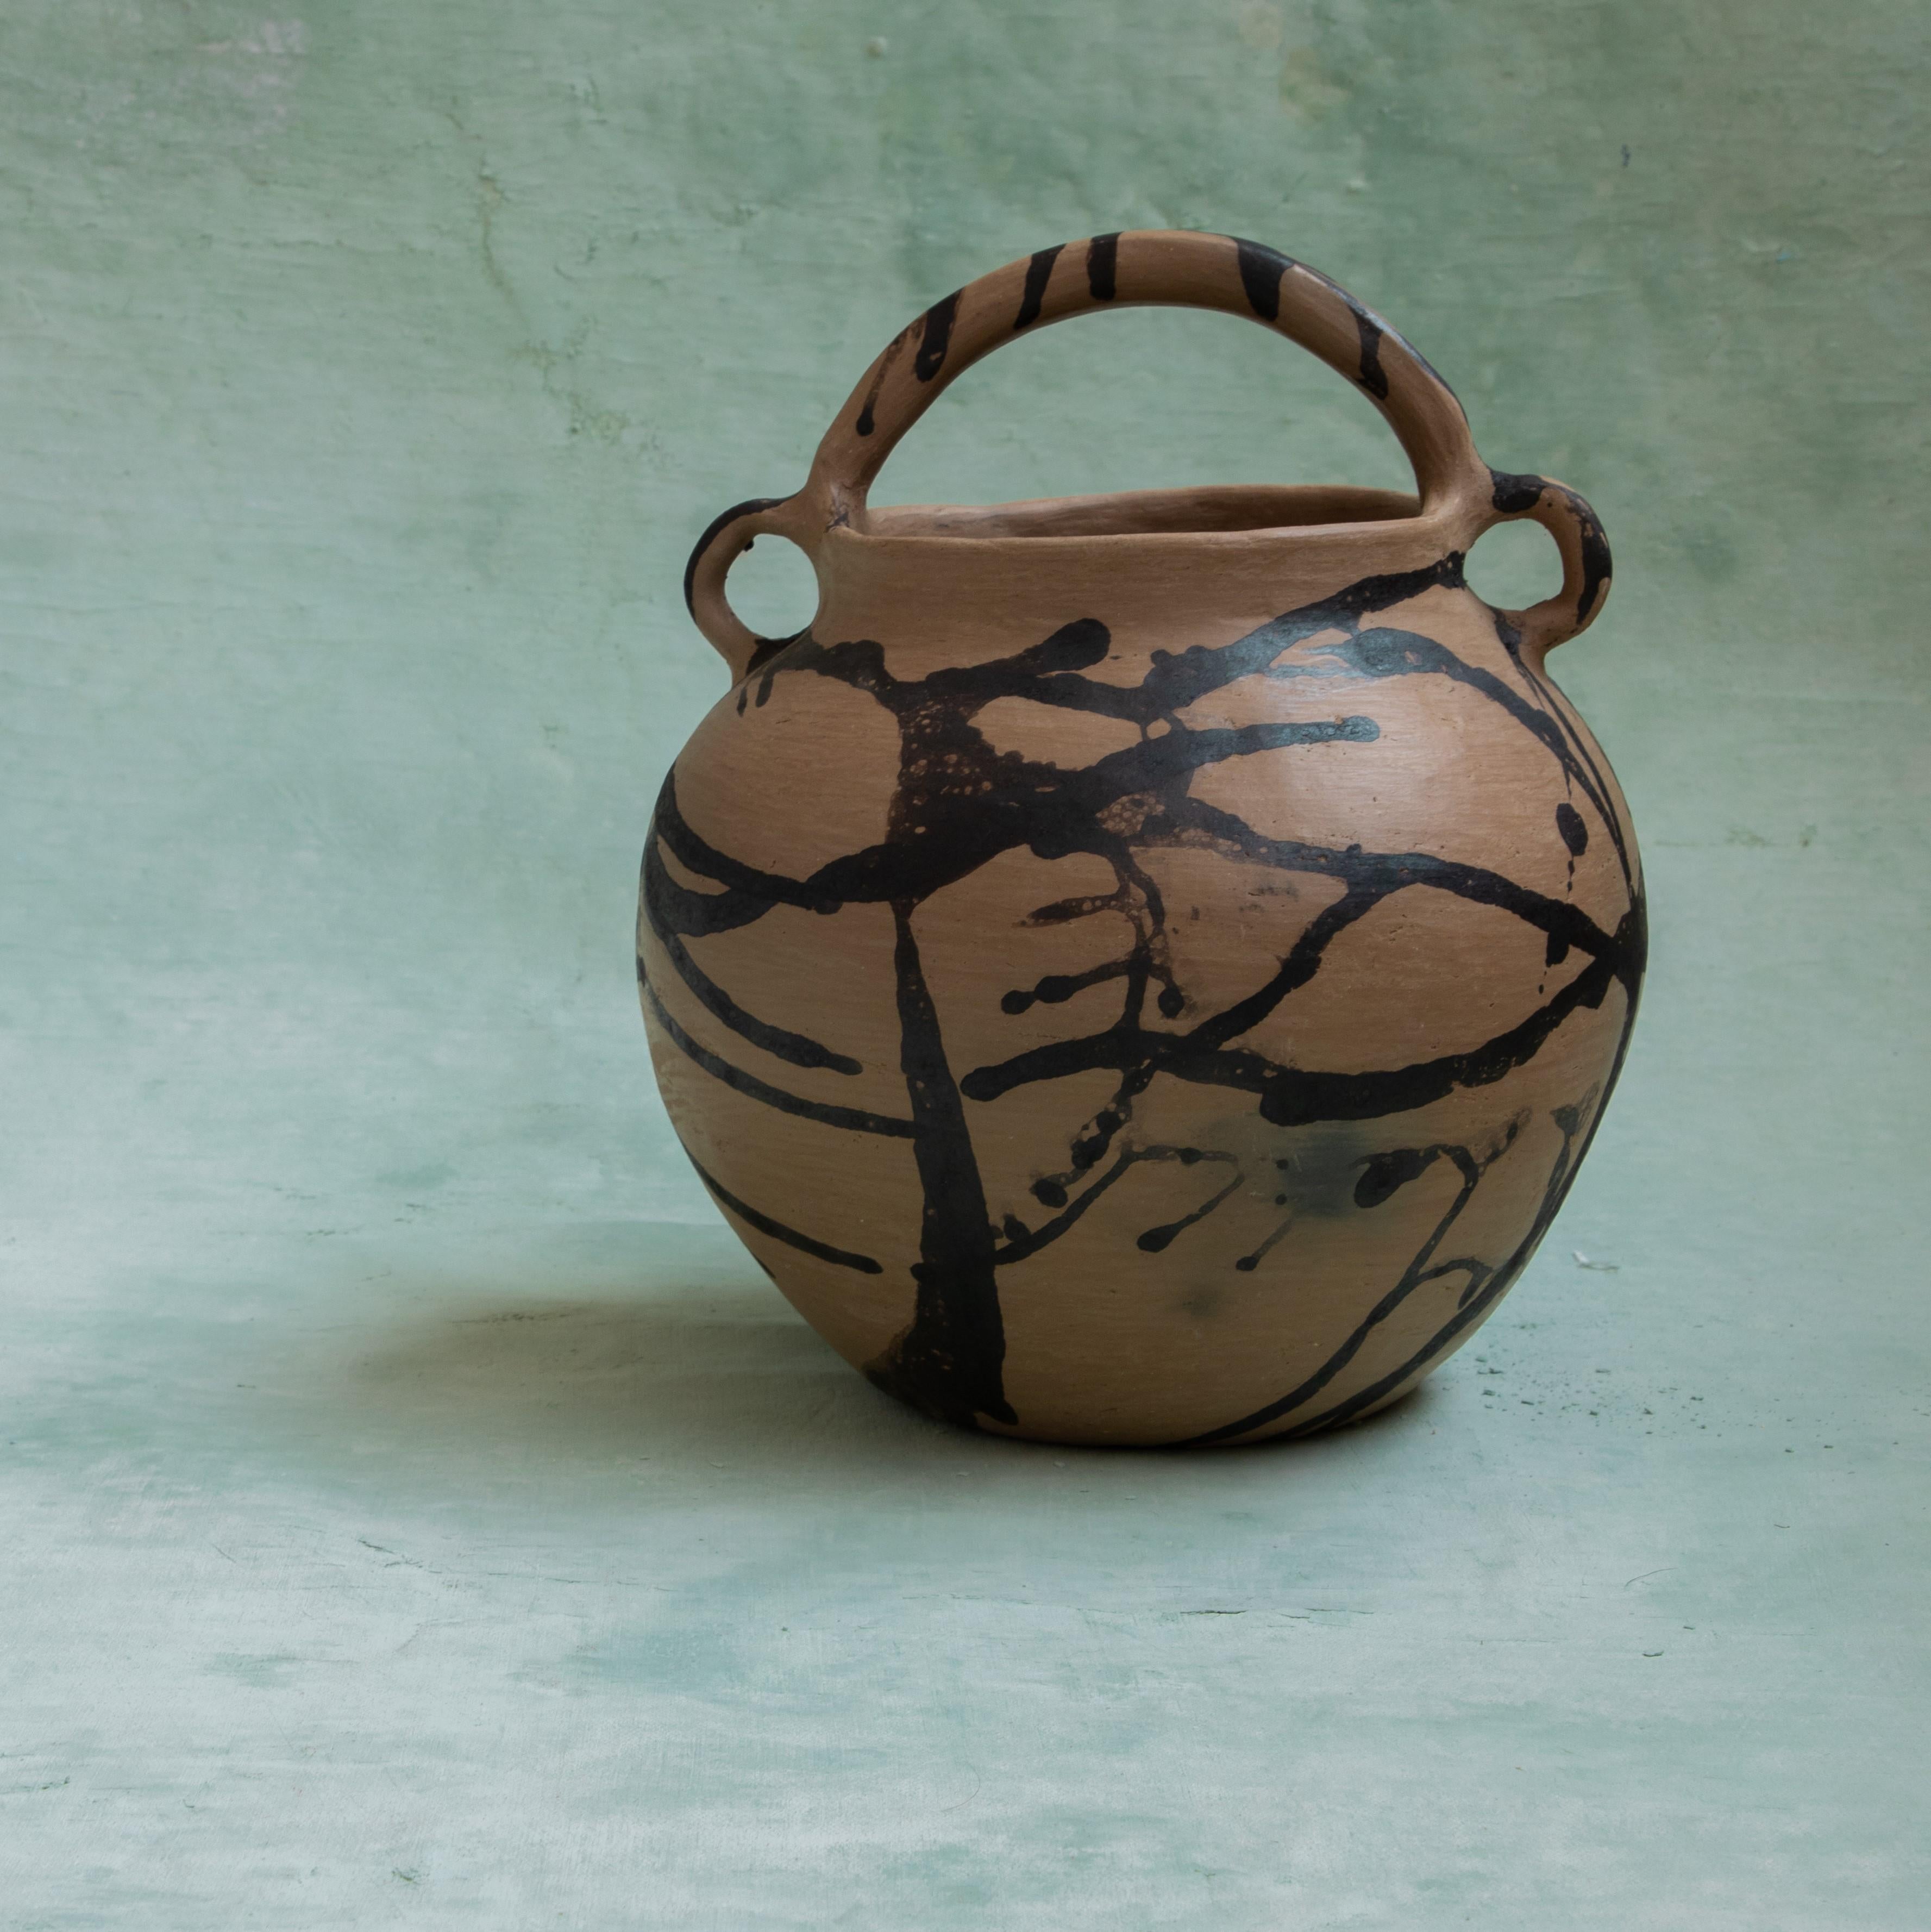 Molera Tonaltepec Pot by Onora
Dimensions: D 35 x 18 cm
Materials: Terracotta, Splattered pottery with oak bark dye

This collection reinterprets one of the oldest structural techniques in pottery, coiling, the vessels made with this technique